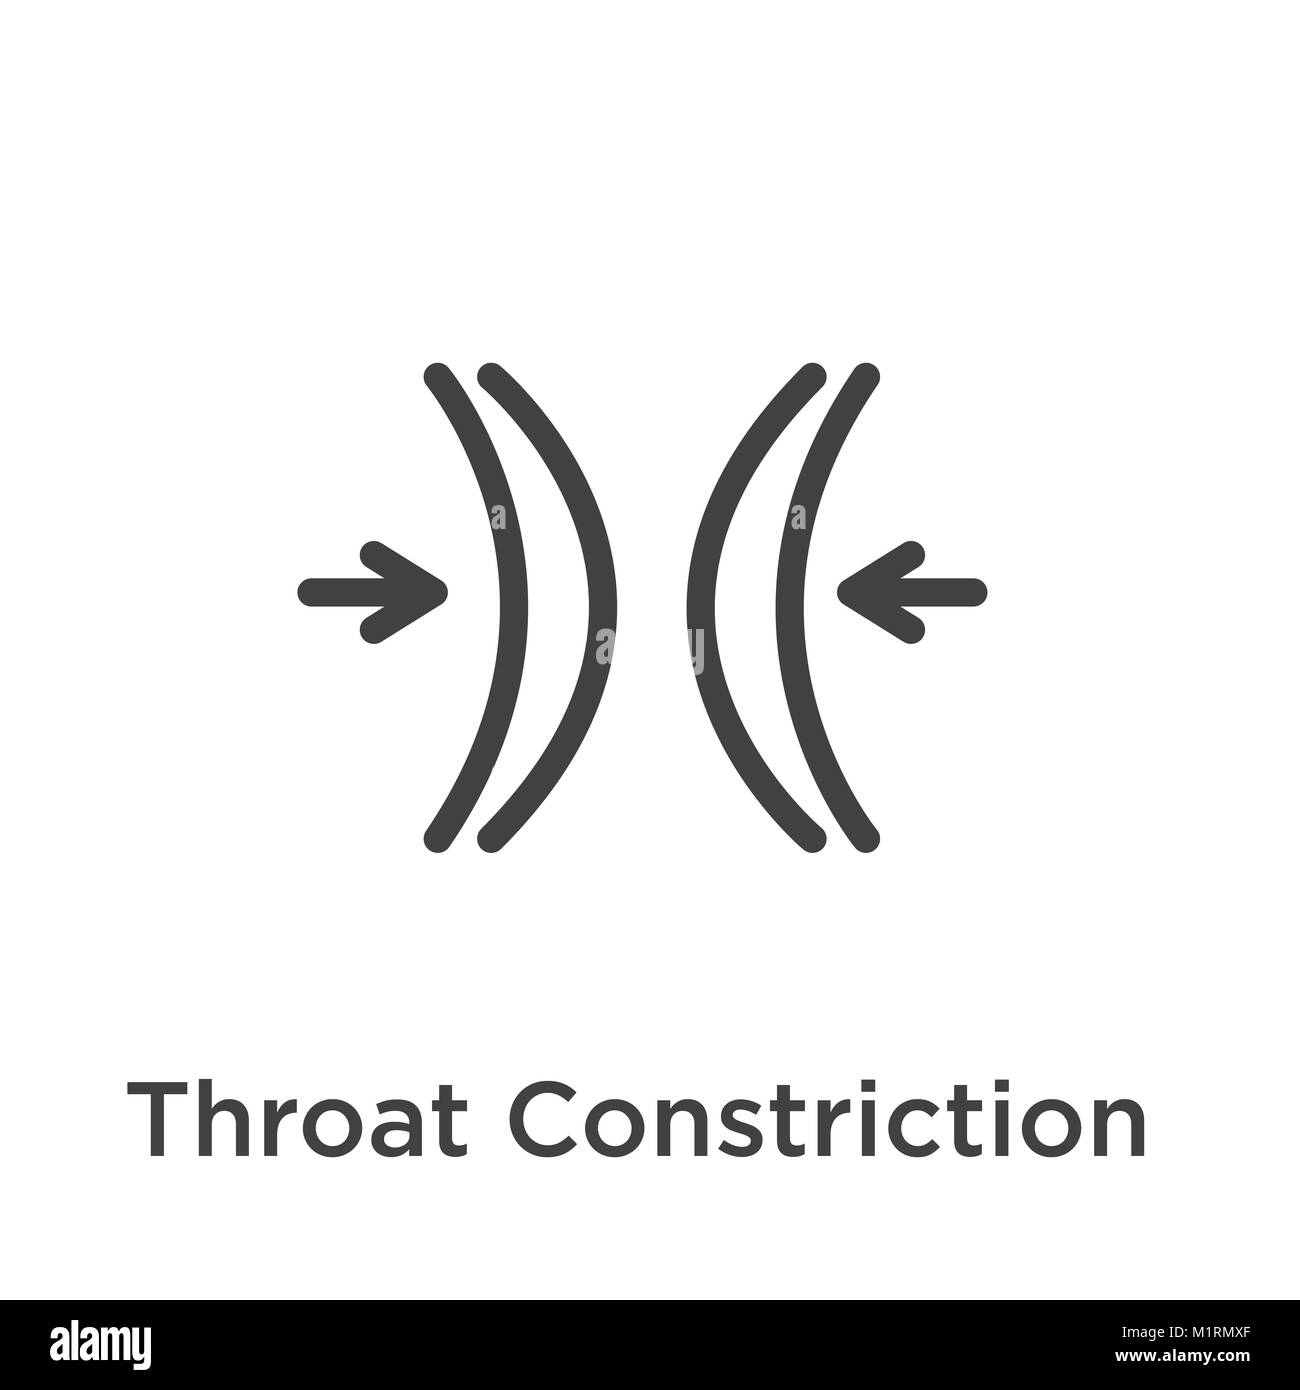 Throat Constriction with Pain & Trouble Breathing through the Air Way or Airway Stock Vector